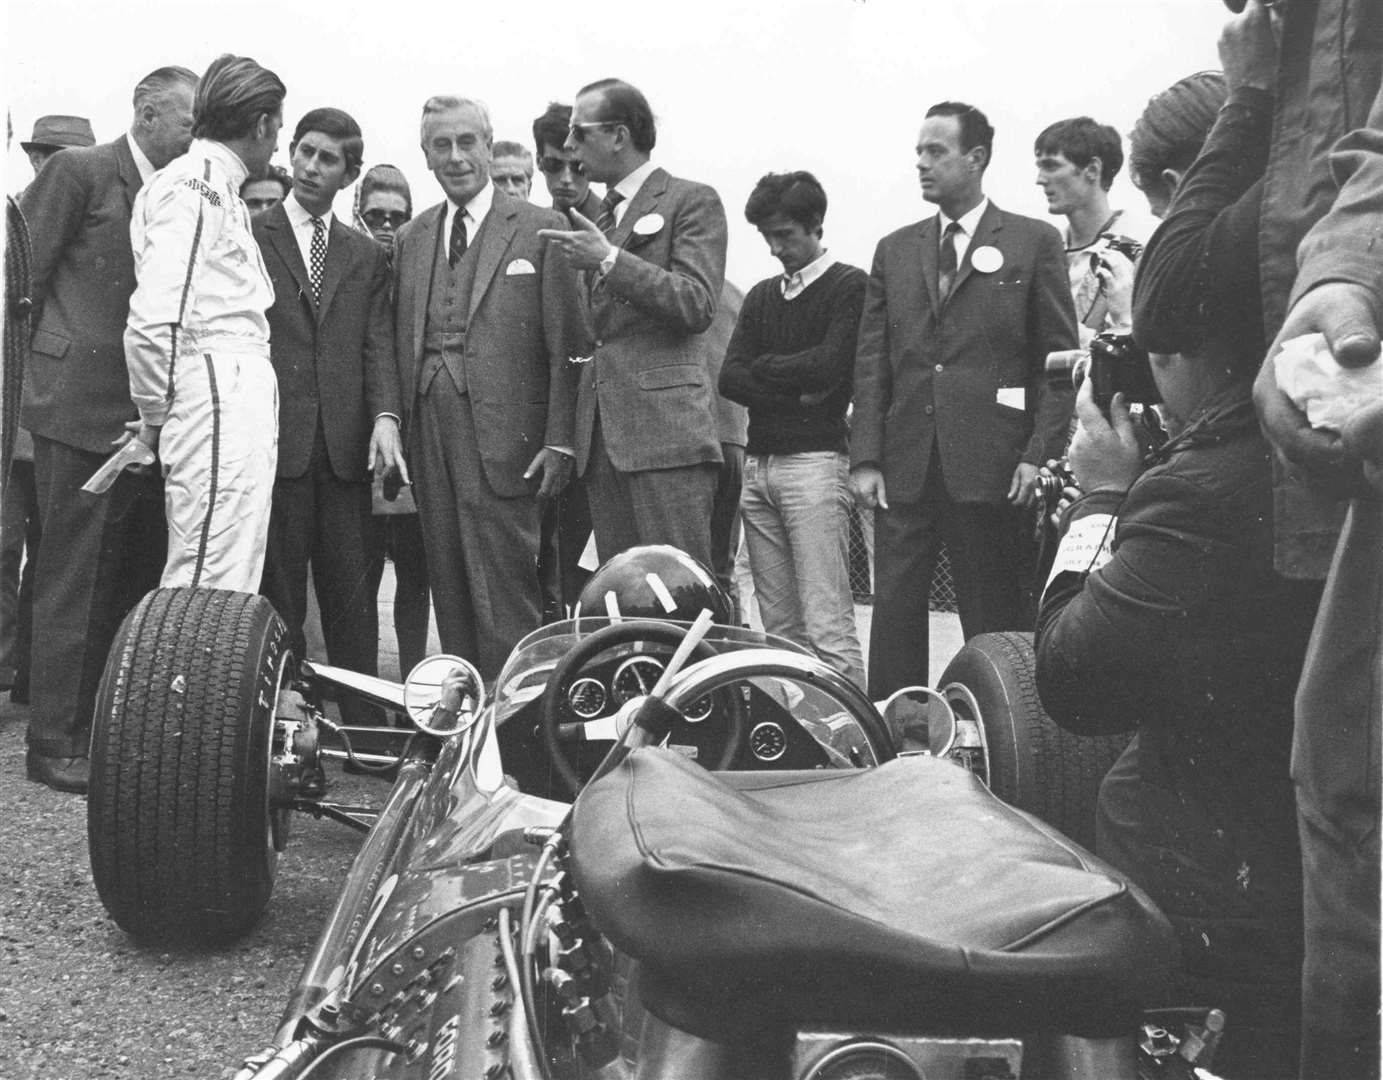 July 1968: Prince Charles drove to Brands Hatch in his blue MGC GT car, where he went to the paddock and met some of the top Grand Prix stars including John Surtees, Graham Hill - pictured here - and Denny Hulme